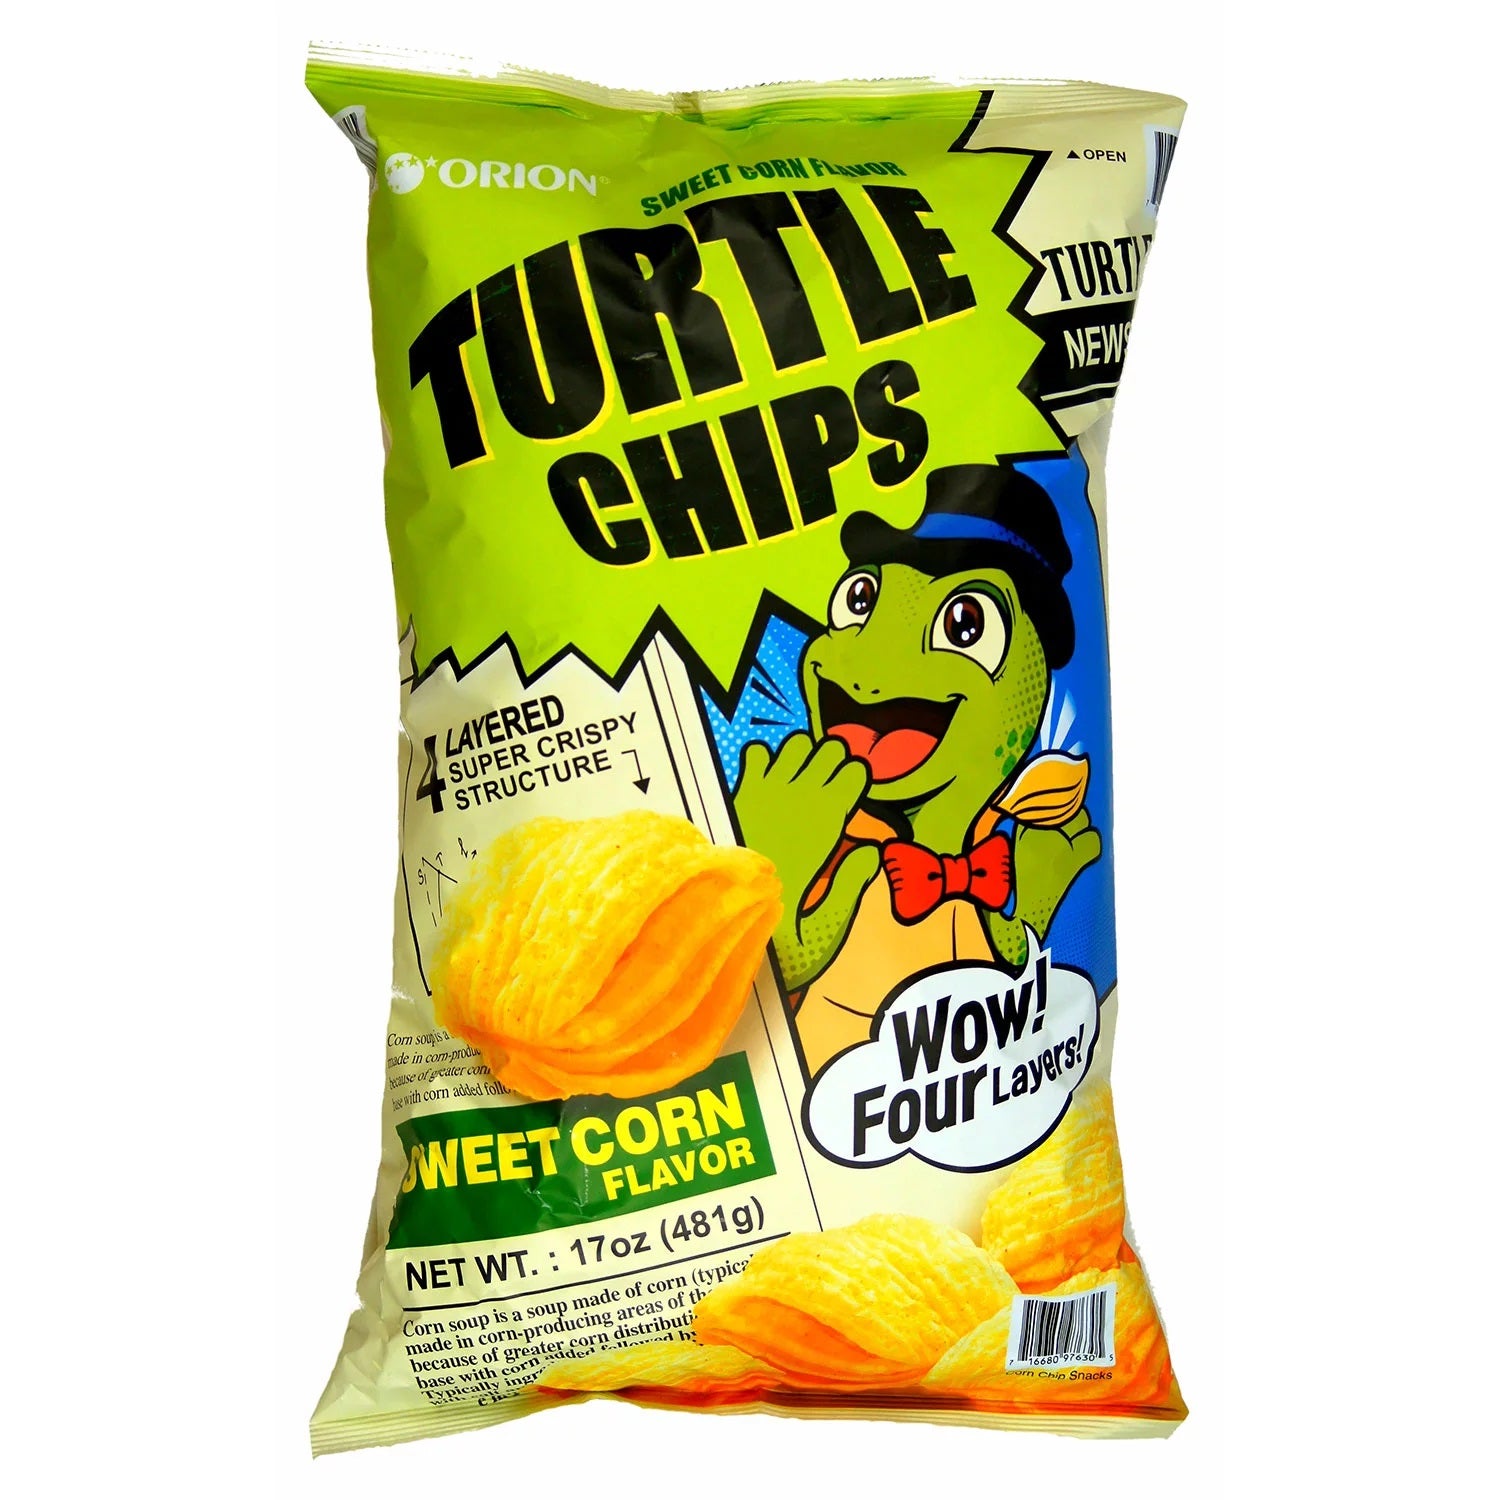 Orion Turtle Chips Sweet Corn